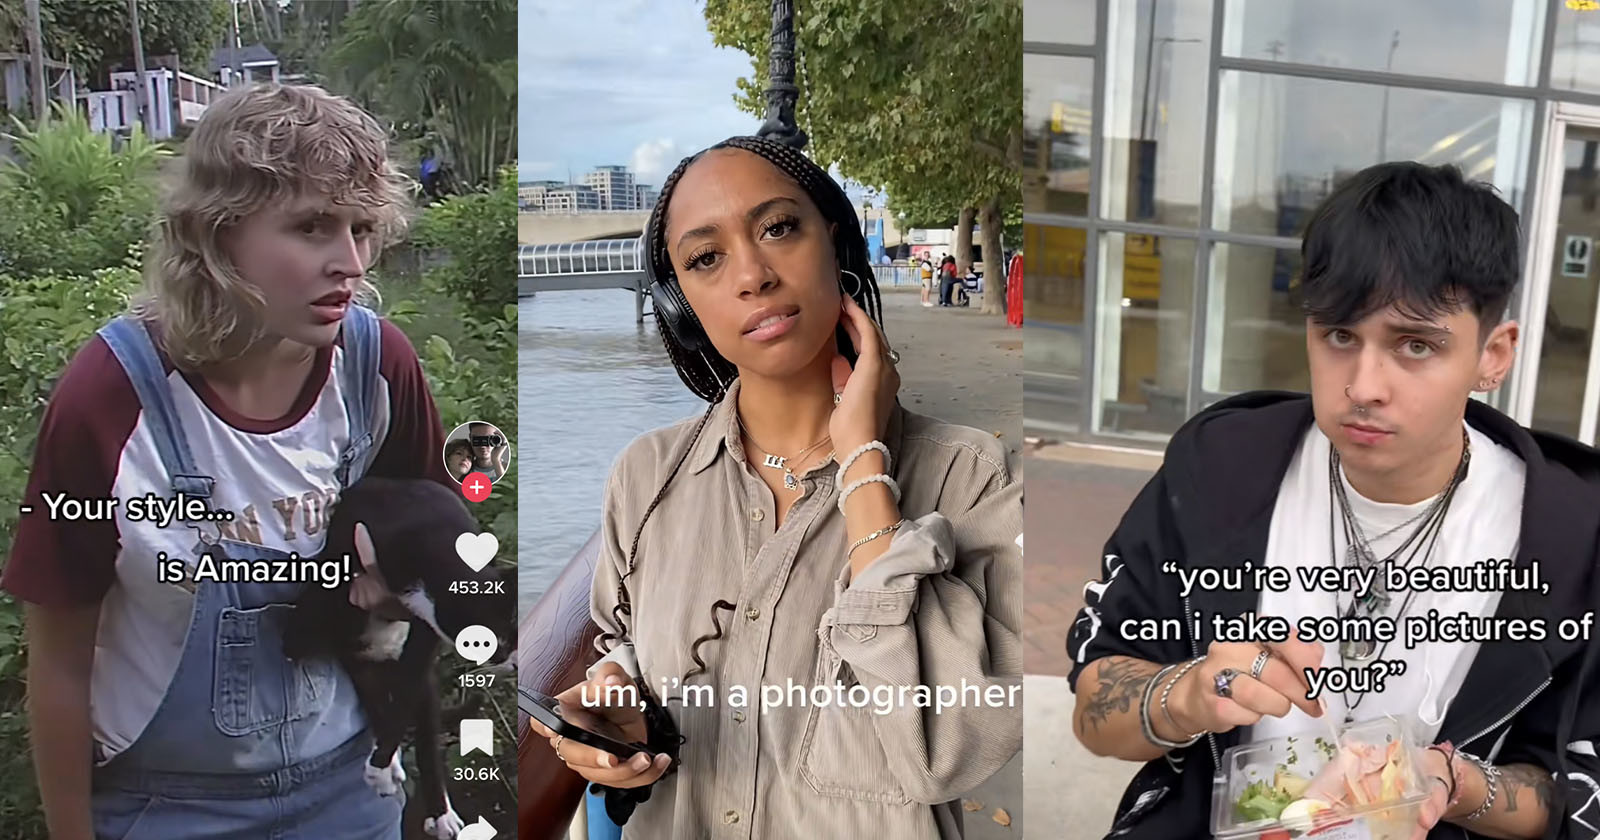  street photographers mocked how they approach strangers 